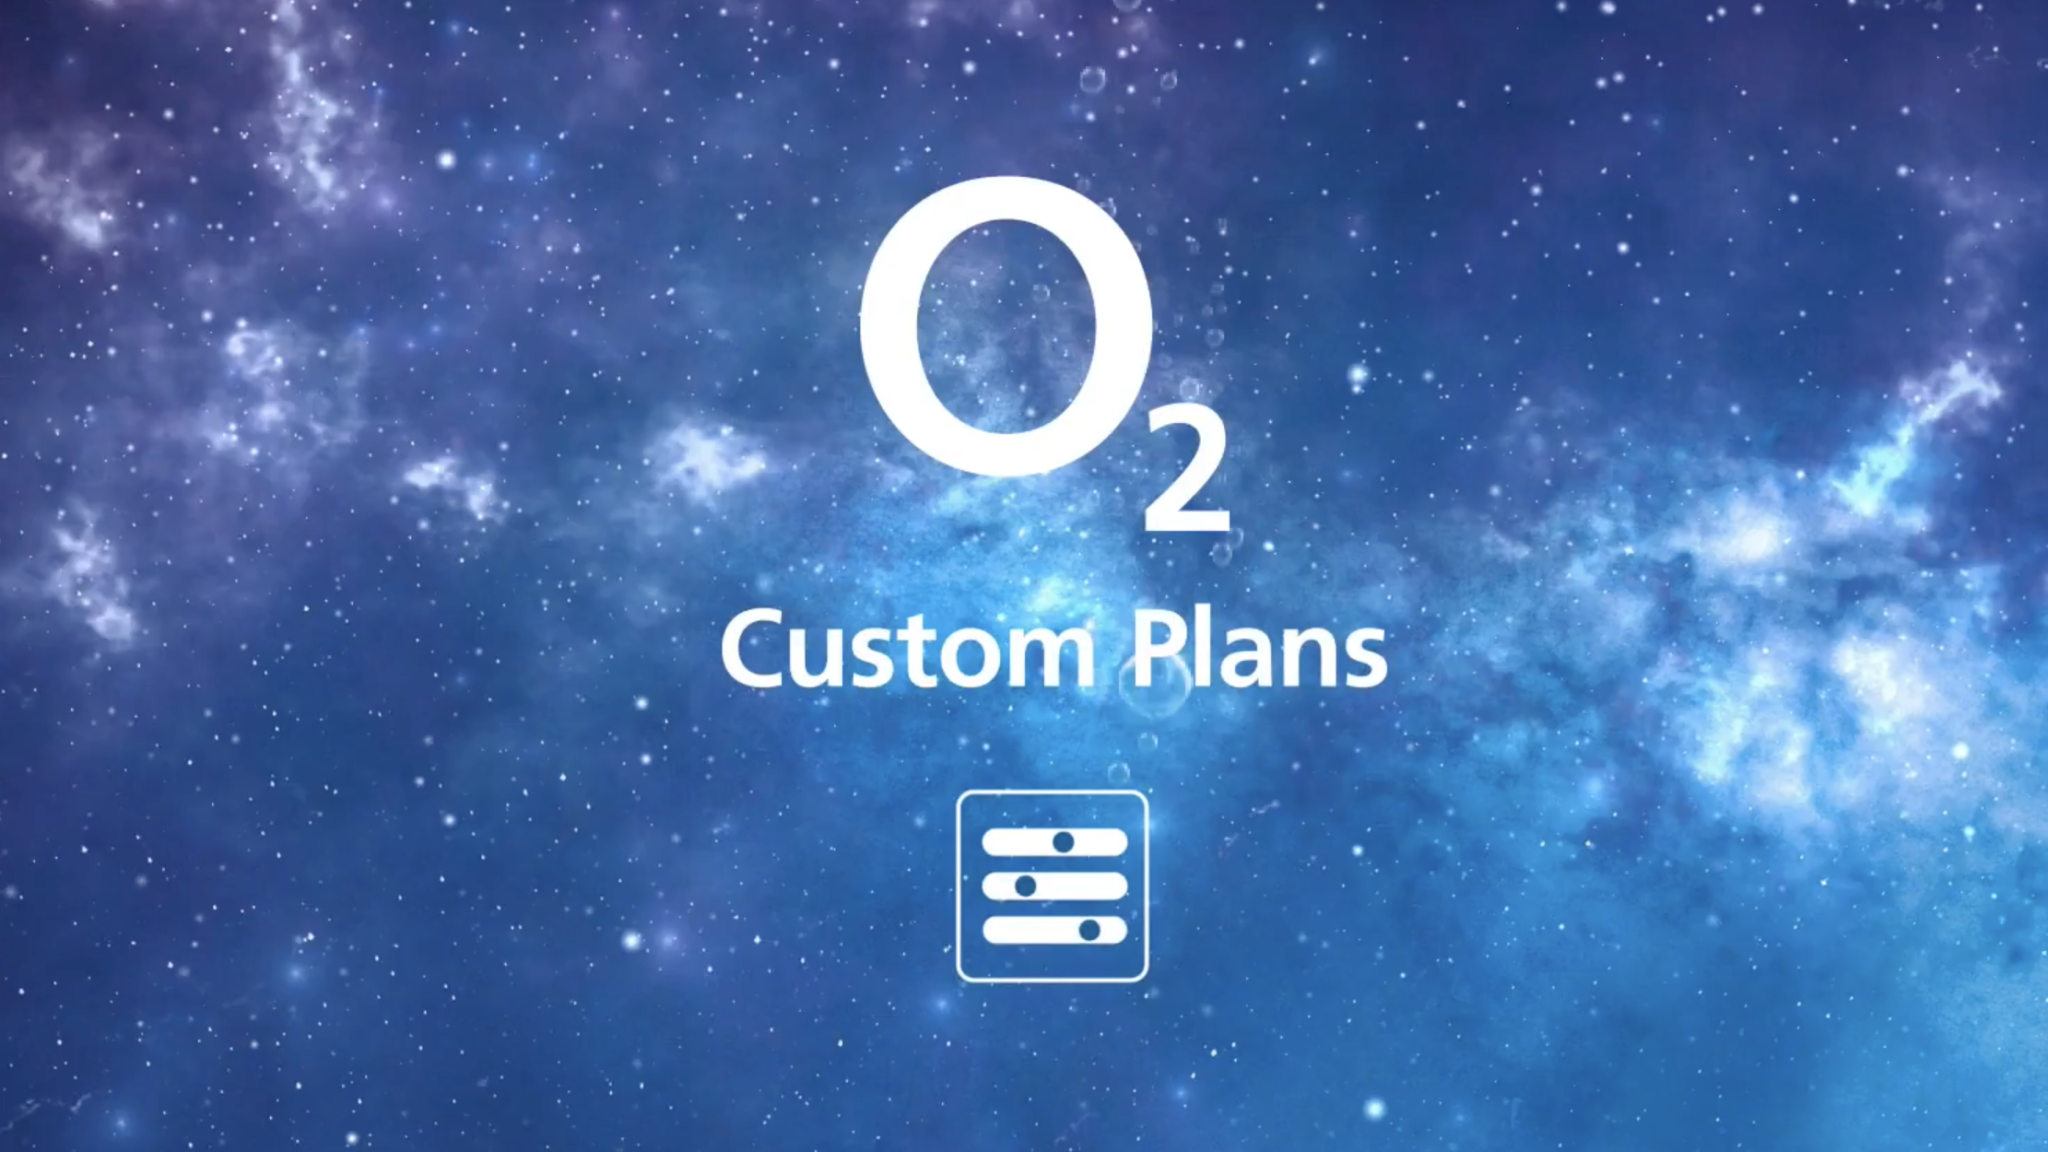 O2 calls time on confusing and inflexible billing by putting customers in charge of how they pay for their devices